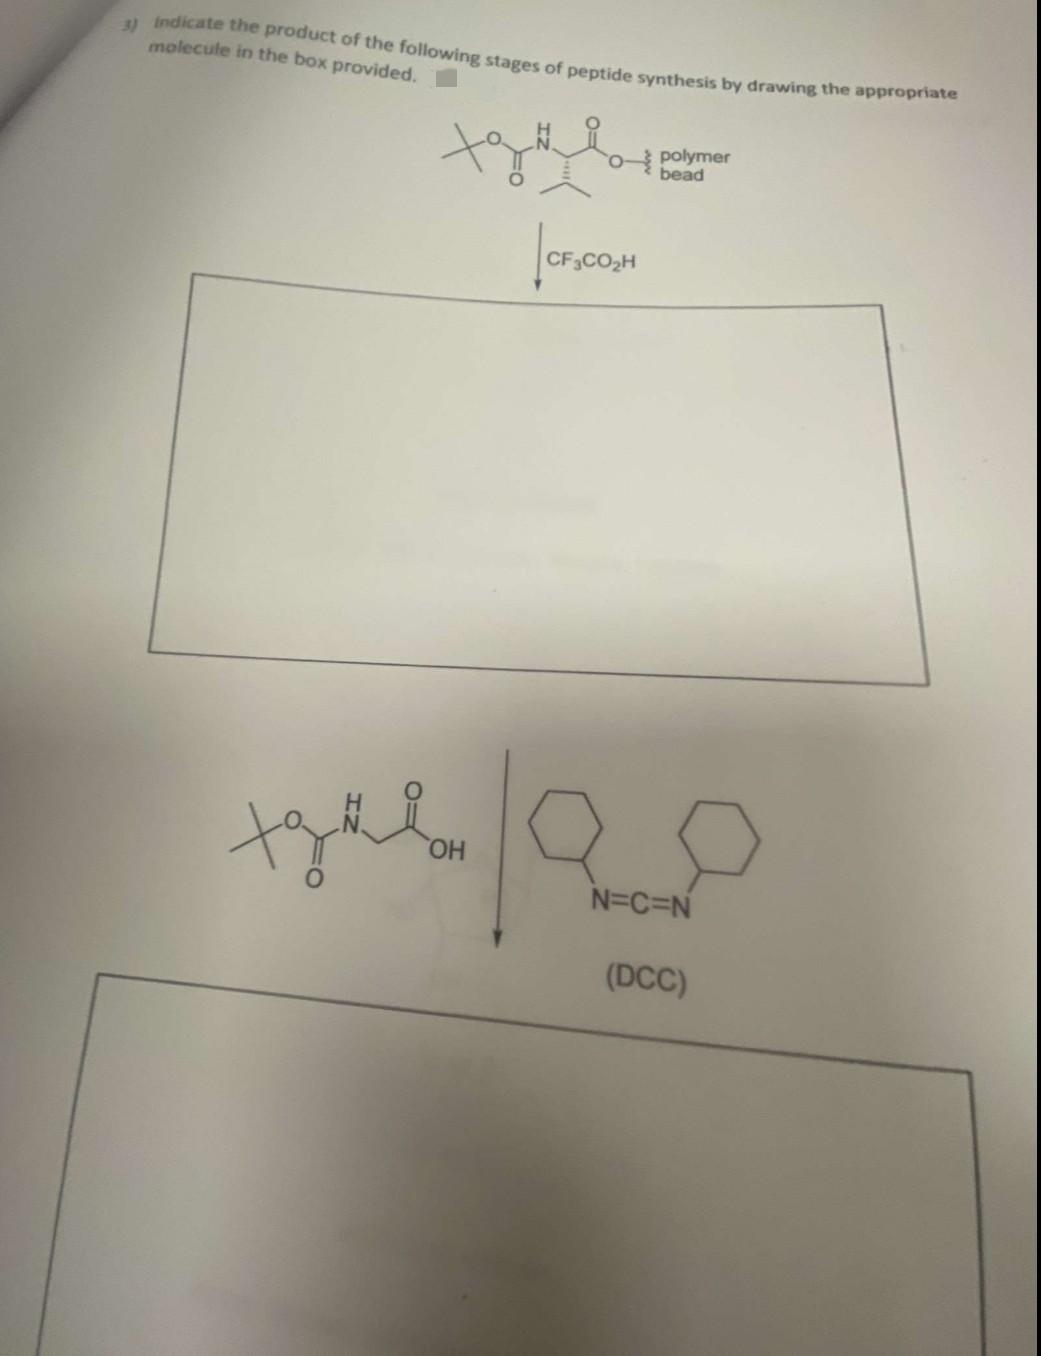 3) Indicate the product of the following stages of peptide synthesis by drawing the appropriate
molecule in the box provided.
polymer
bead
CF CO2H
HO.
N=C=N
(DCC)
